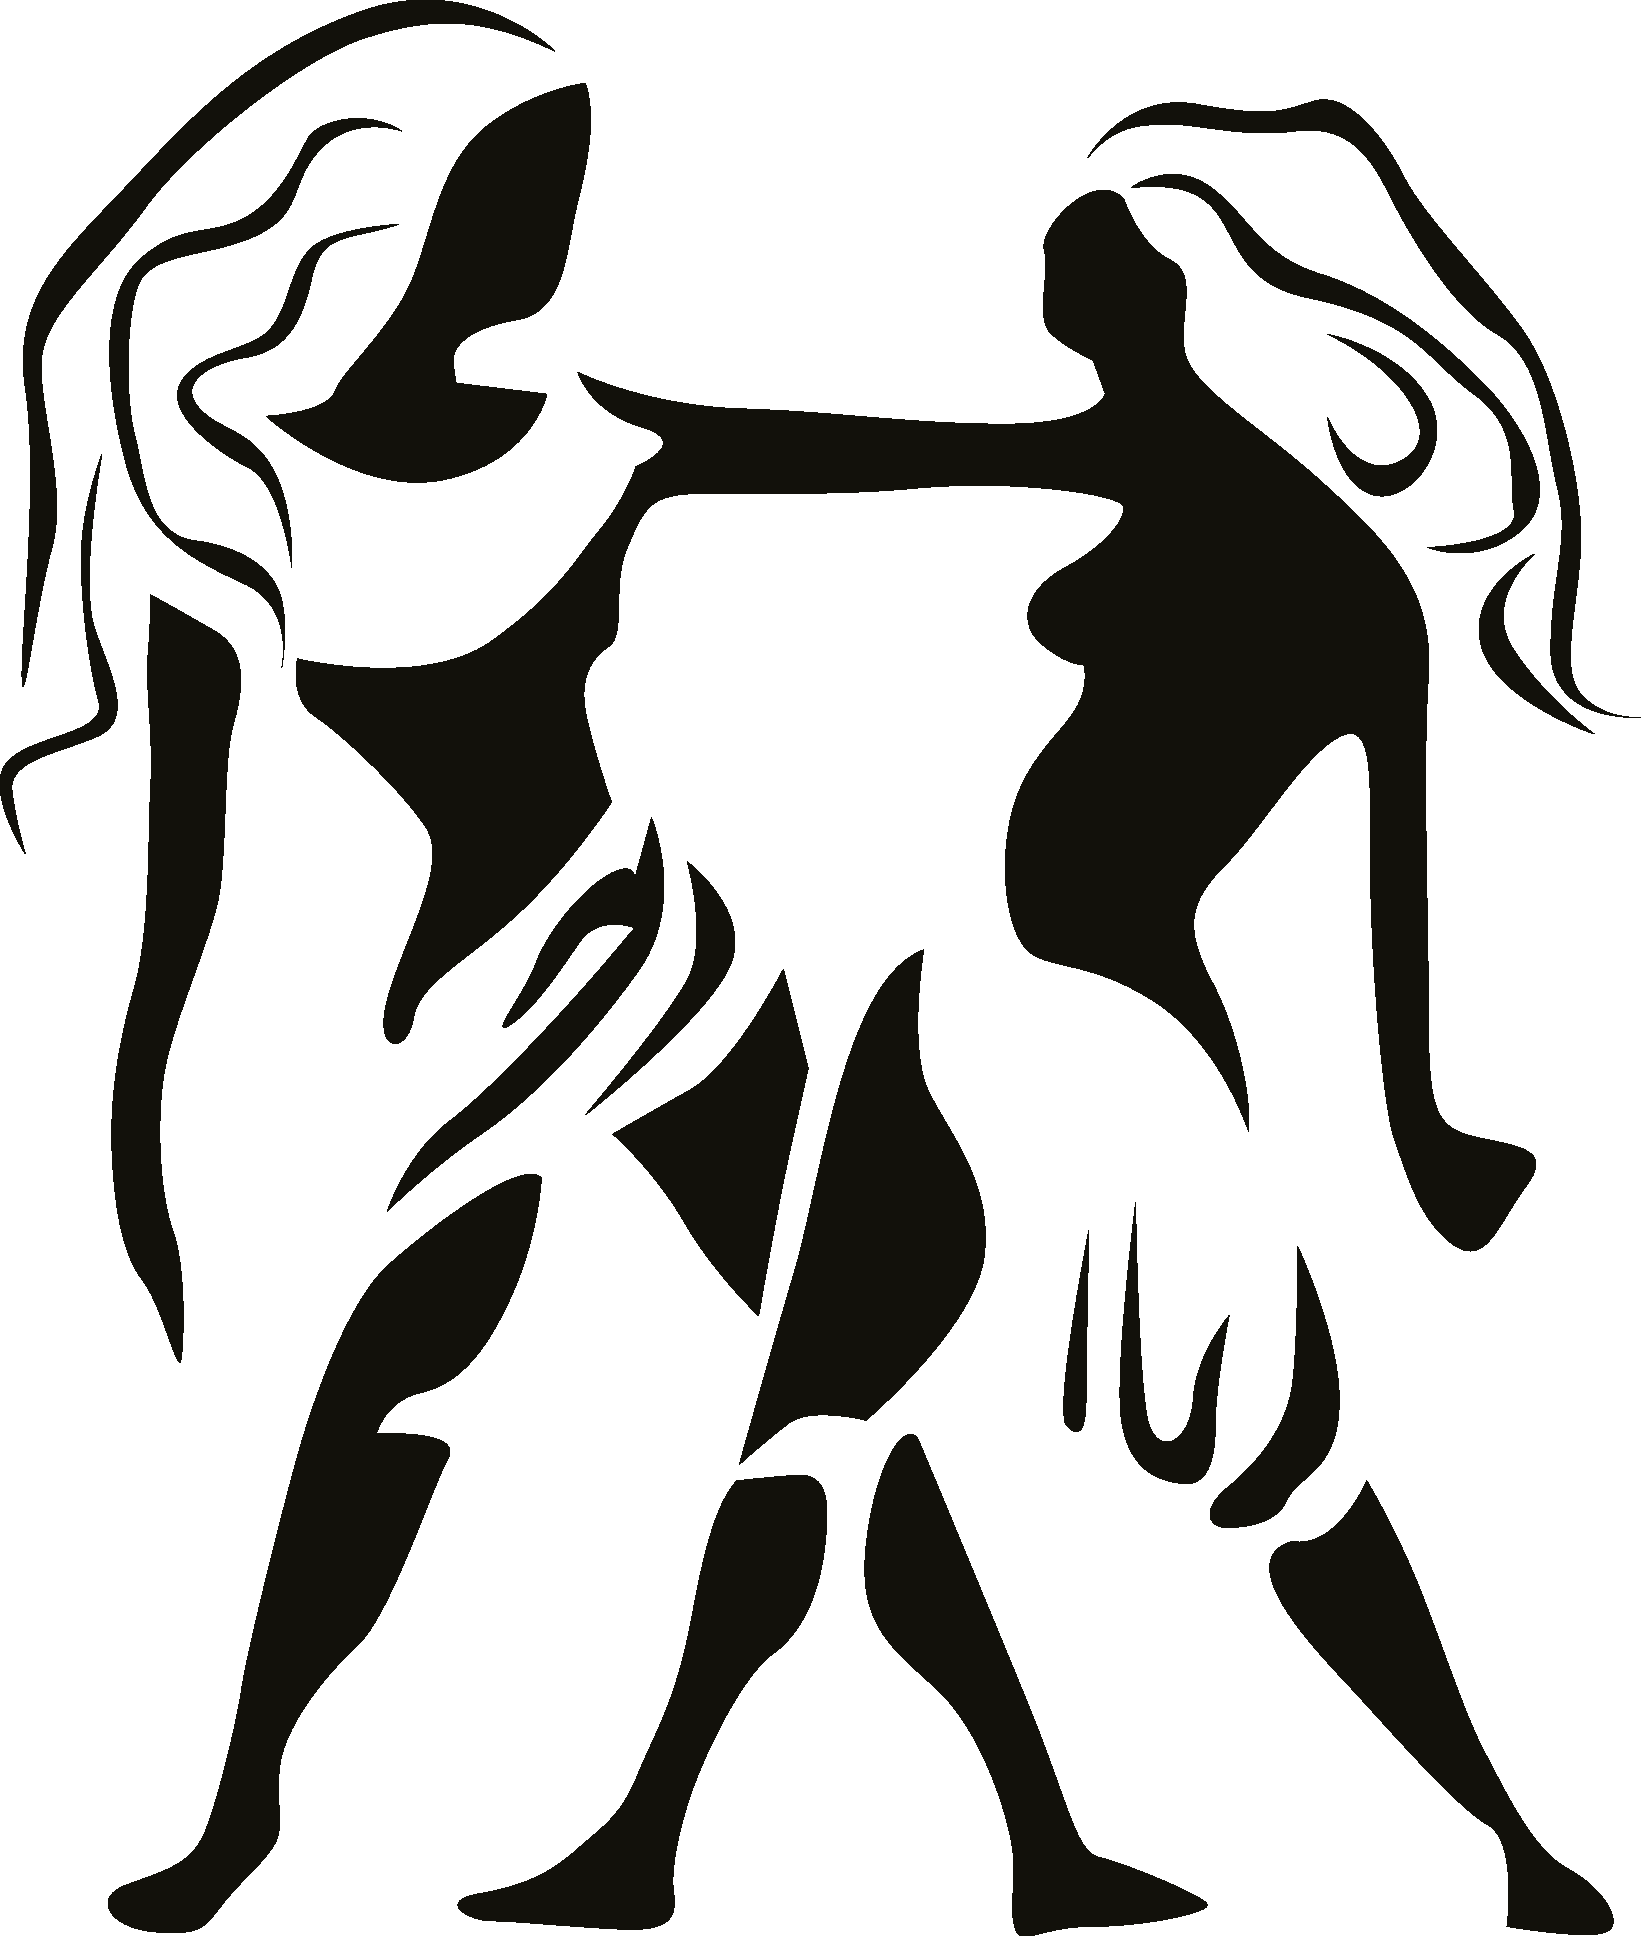 Zodiac Signs Silhouette png